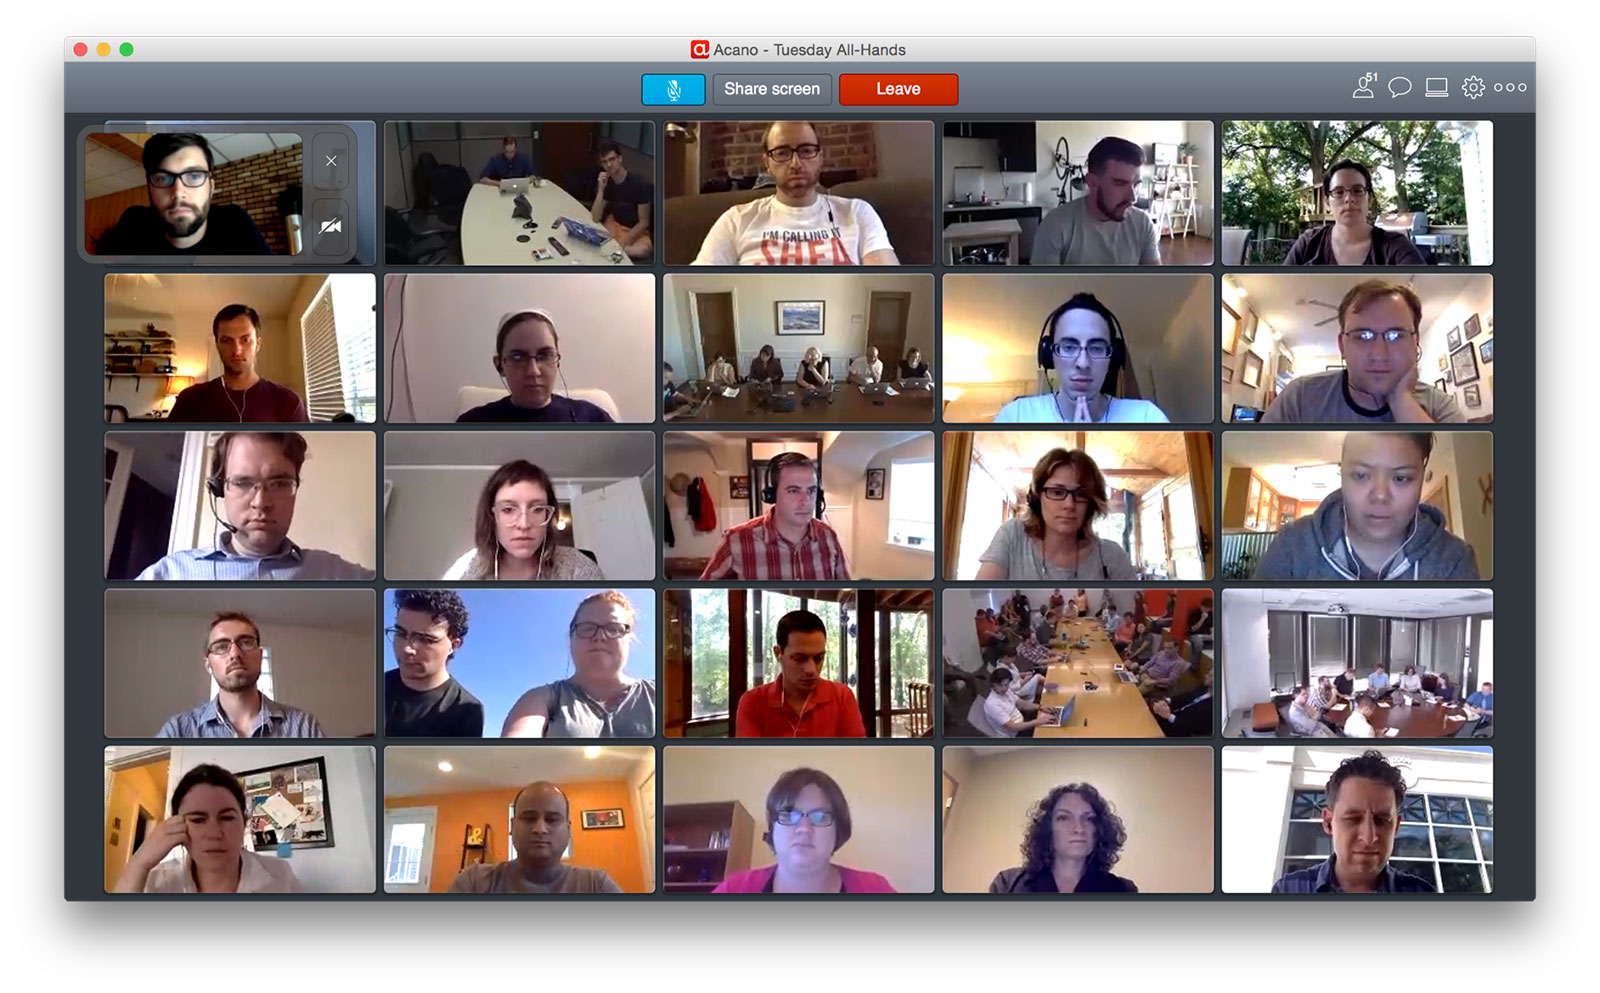 A grid of 18F team members using video chat to attend a meeting.